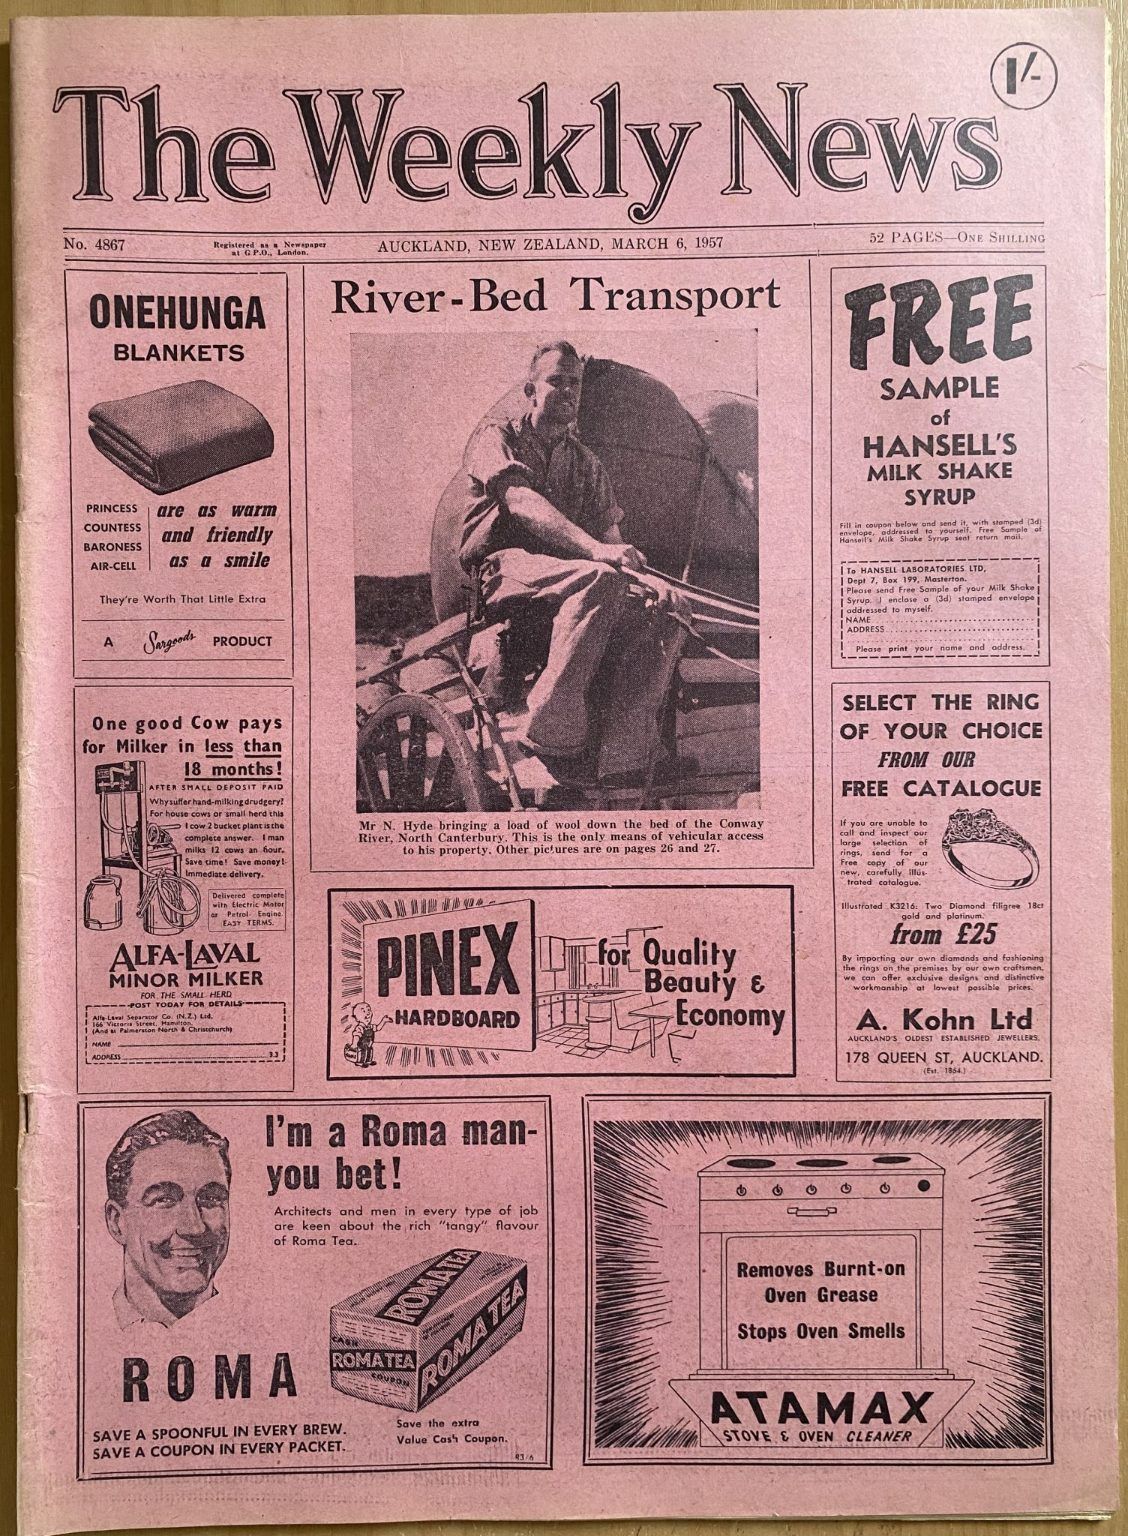 OLD NEWSPAPER: The Weekly News, No. 4867, 6 March 1957